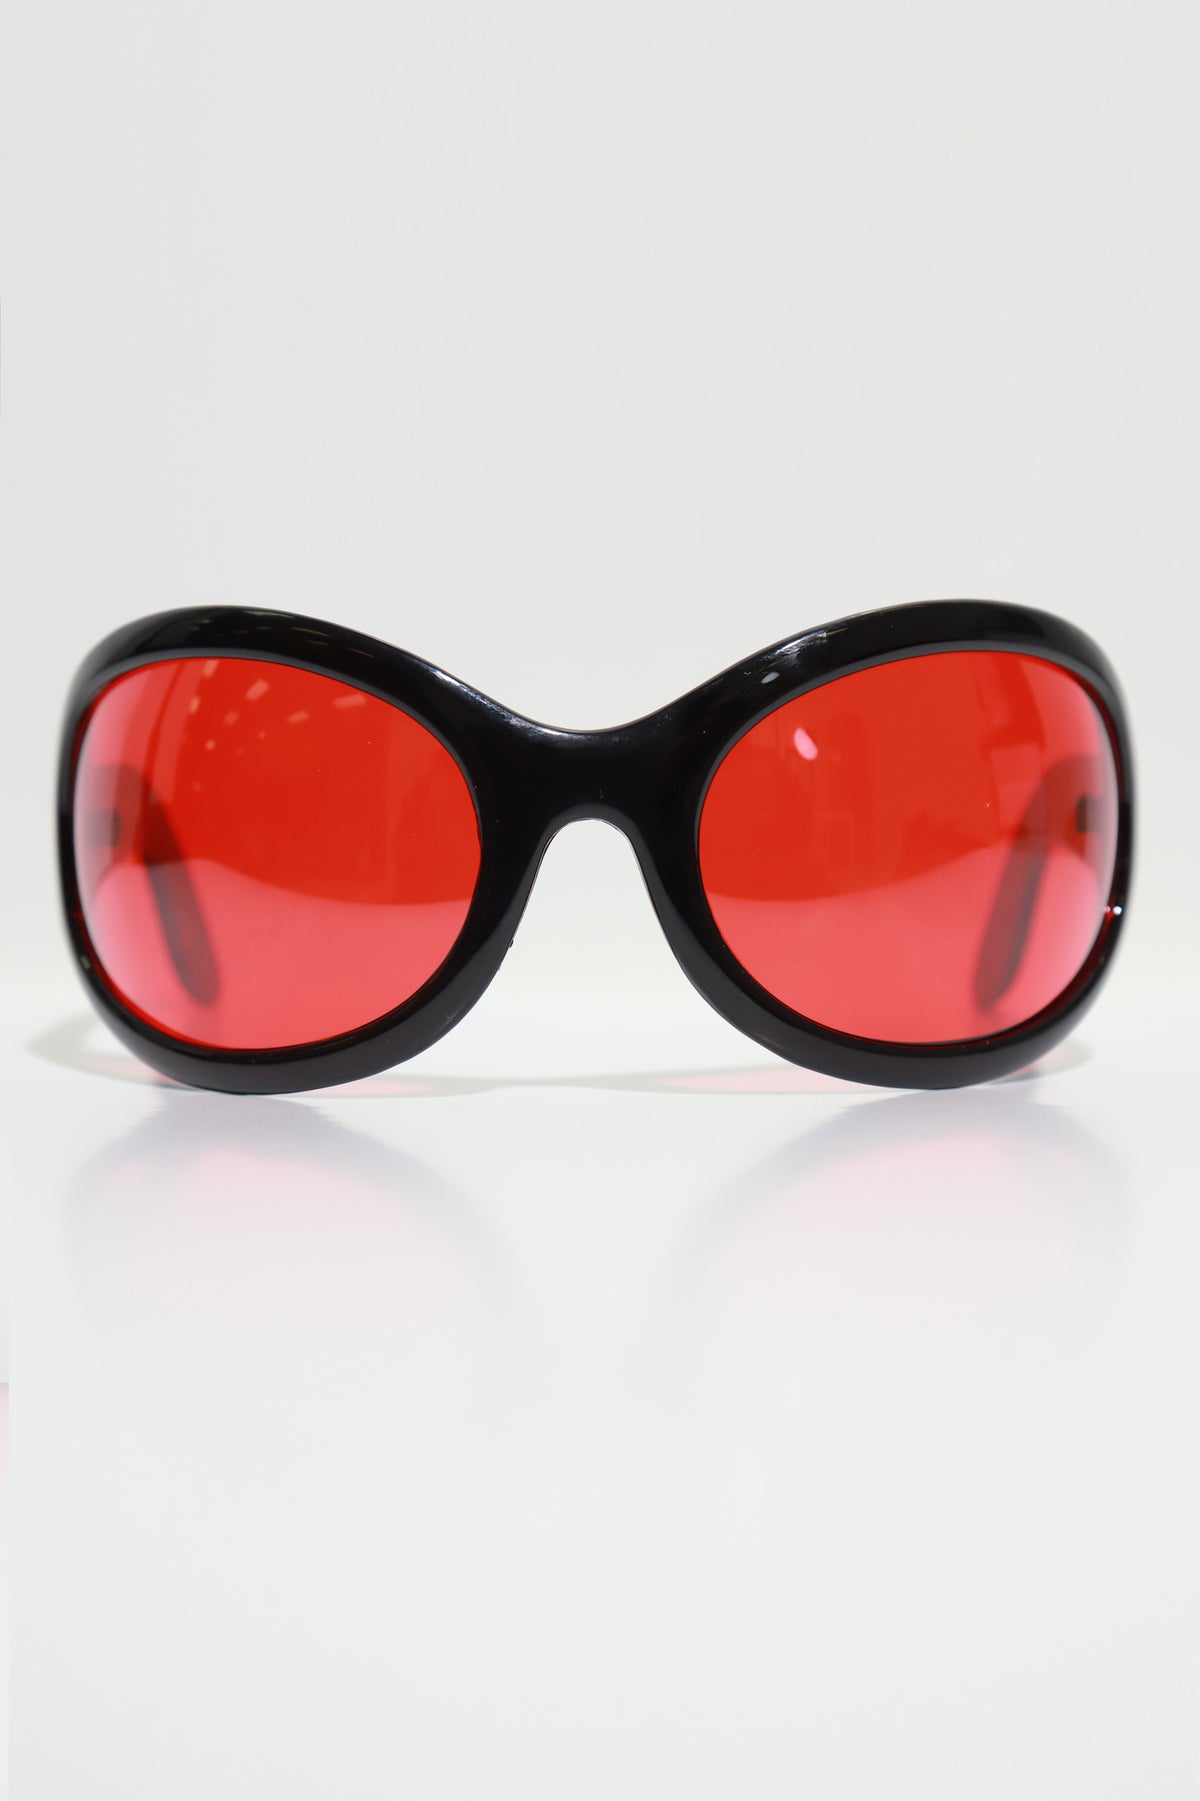 
              Take A Chance Retro Rounded Sunglasses - Black/Red - Swank A Posh
            